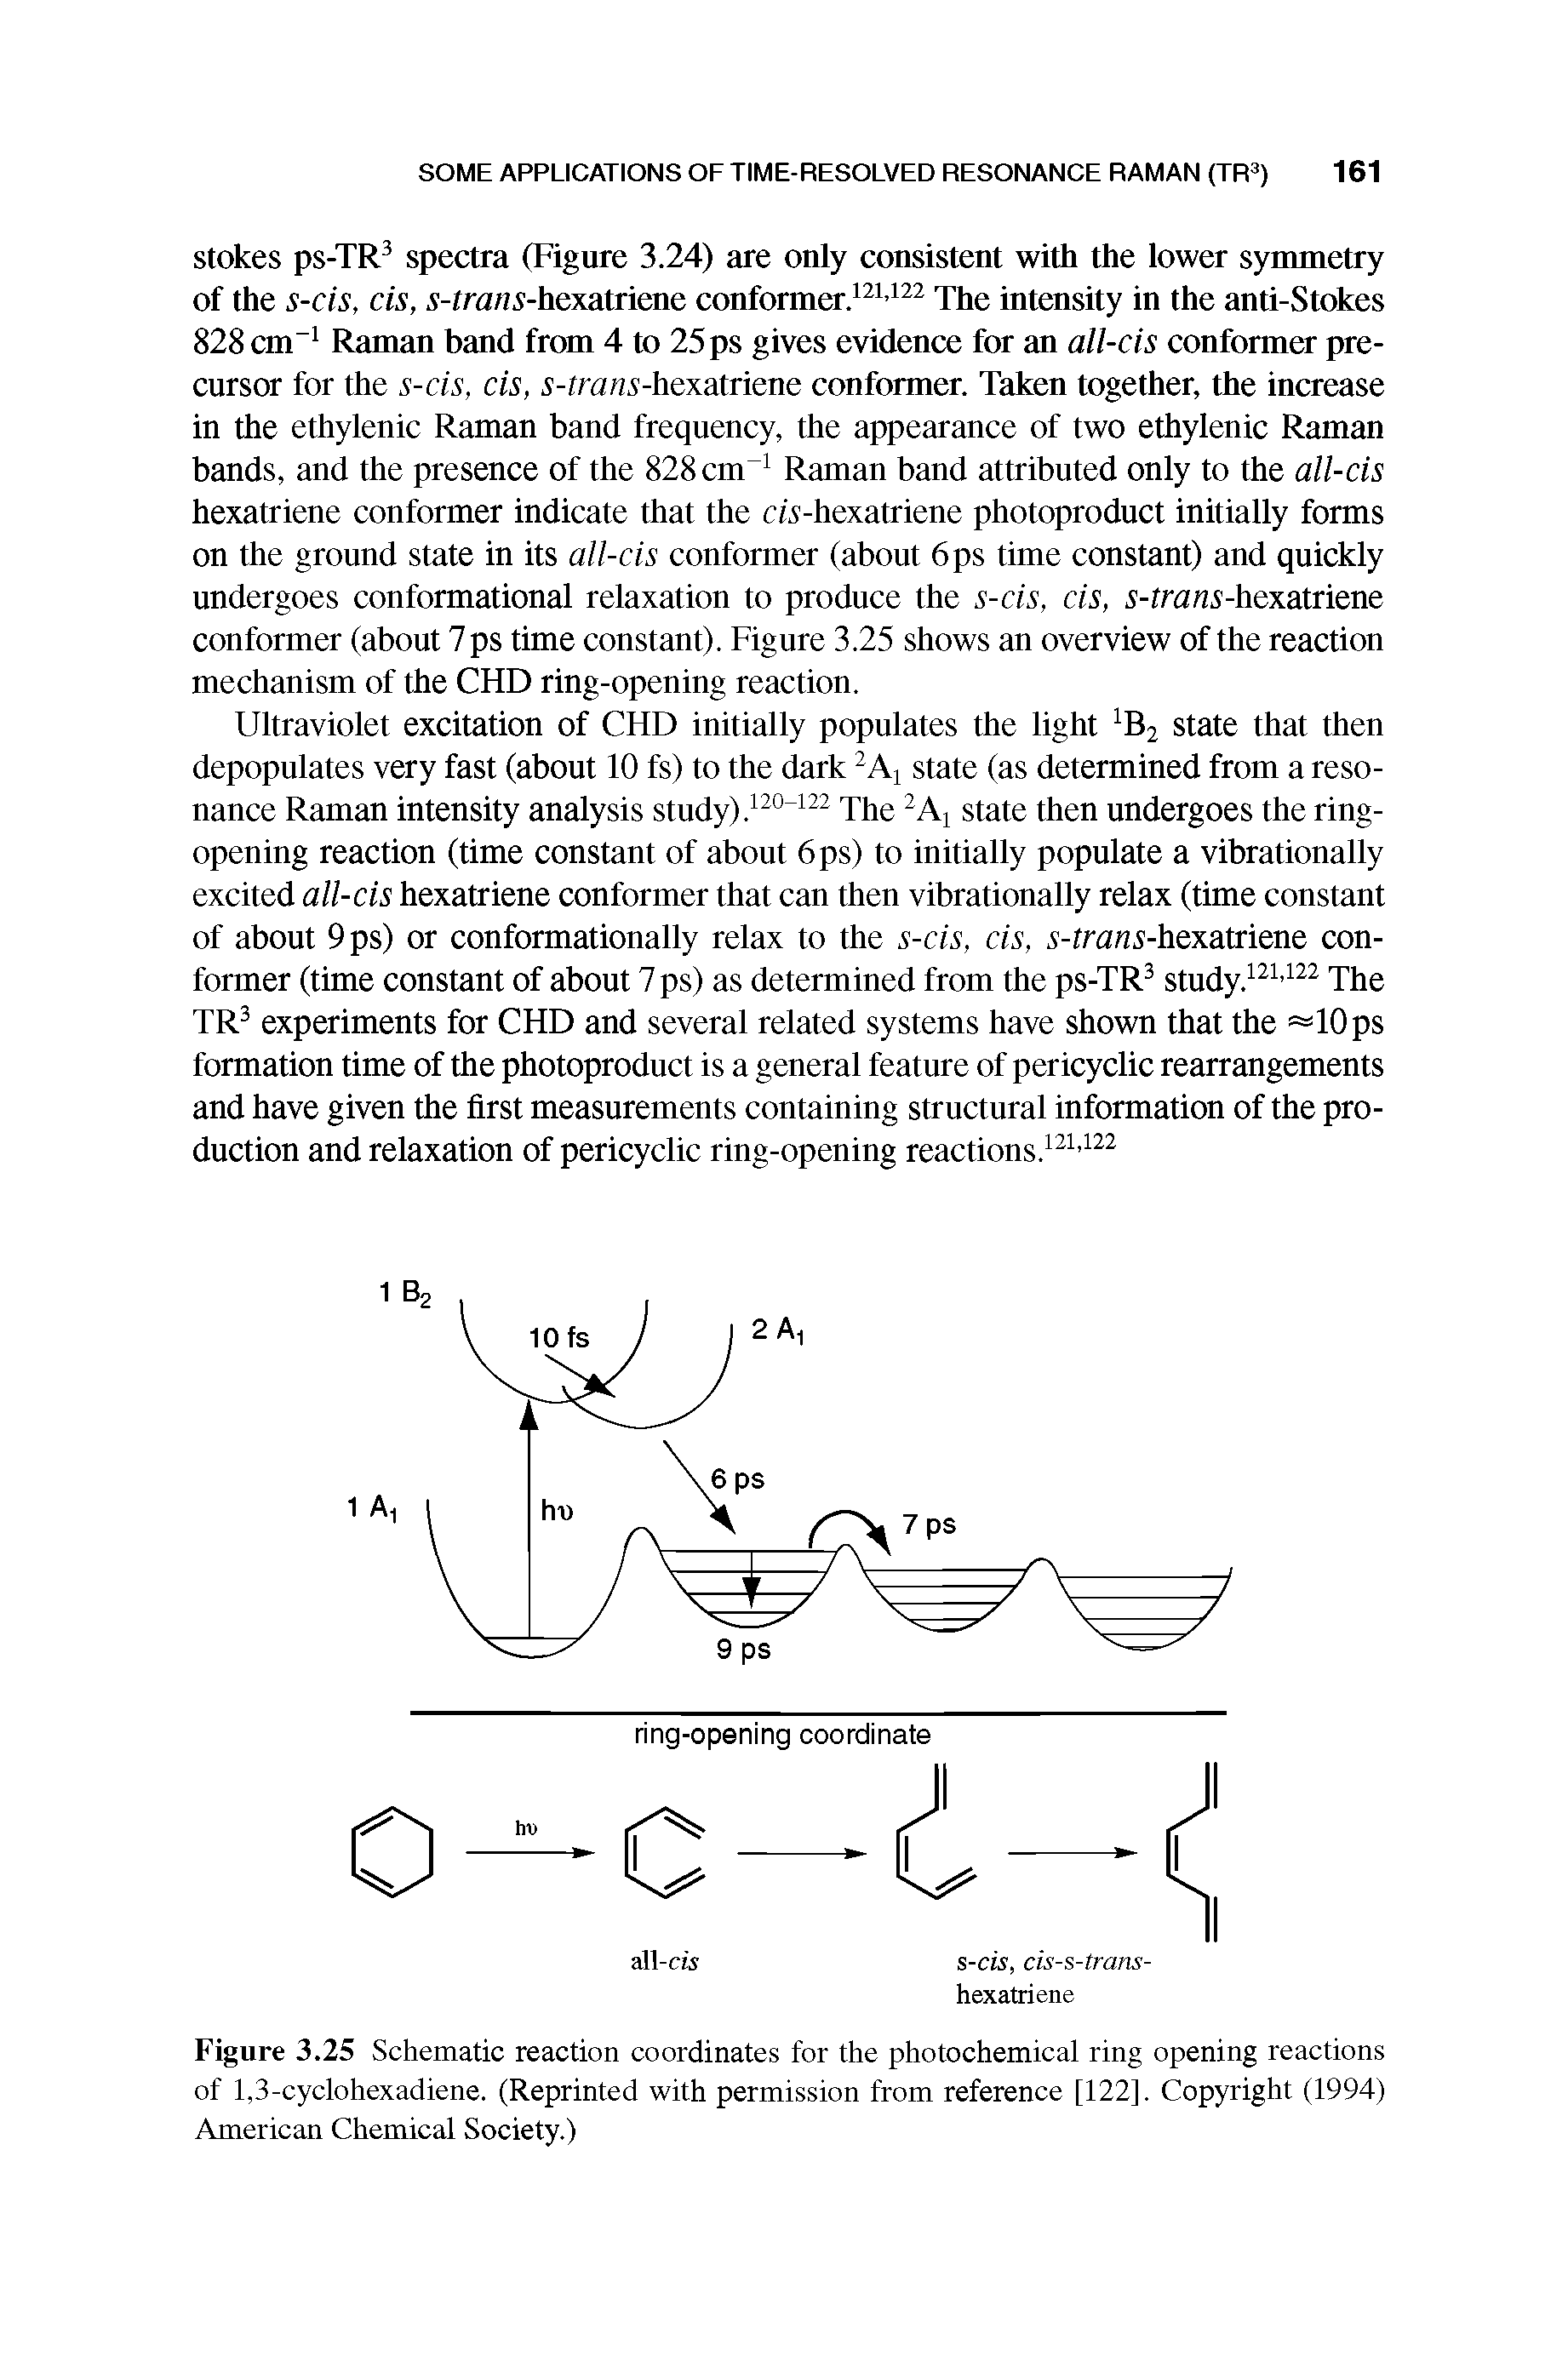 Figure 3.25 Schematic reaction coordinates for the photochemical ring opening reactions of 1,3-cyclohexadiene. (Reprinted with permission from reference [122]. Copyright (1994) American Chemical Society.)...